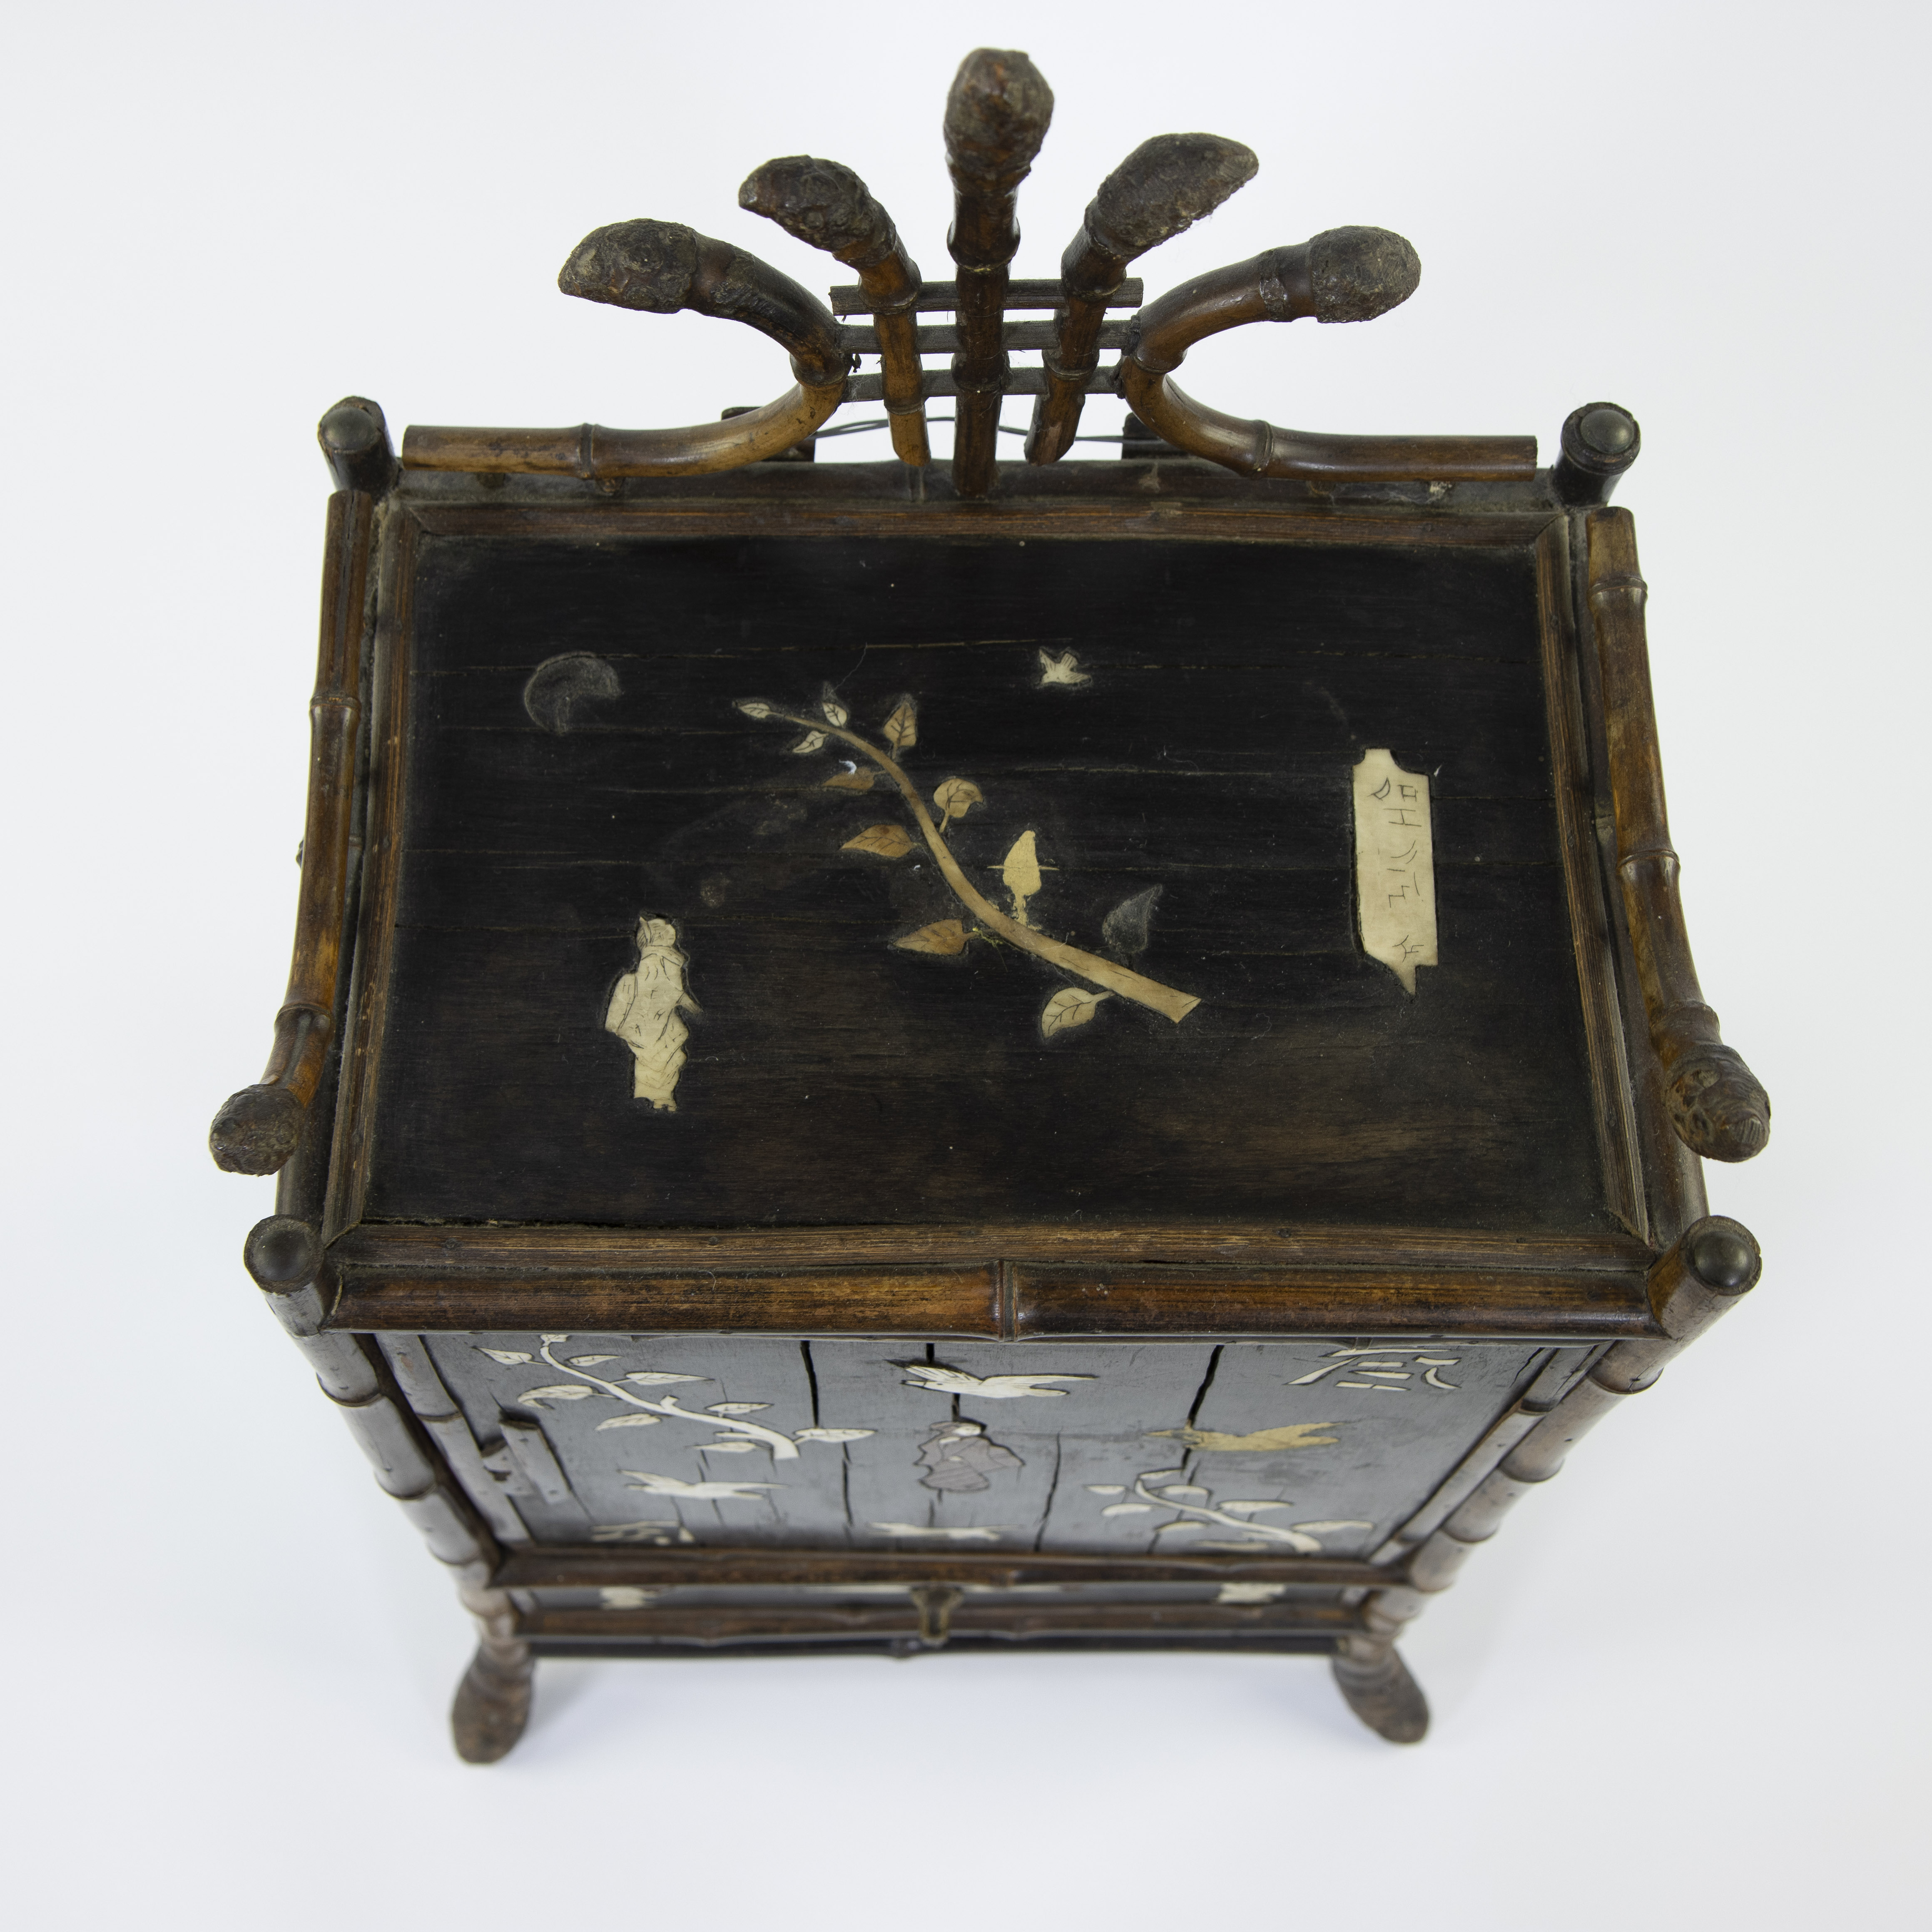 Asian bamboo cabinet with inlaid work of leaves, birds and figures in bone - Image 6 of 6